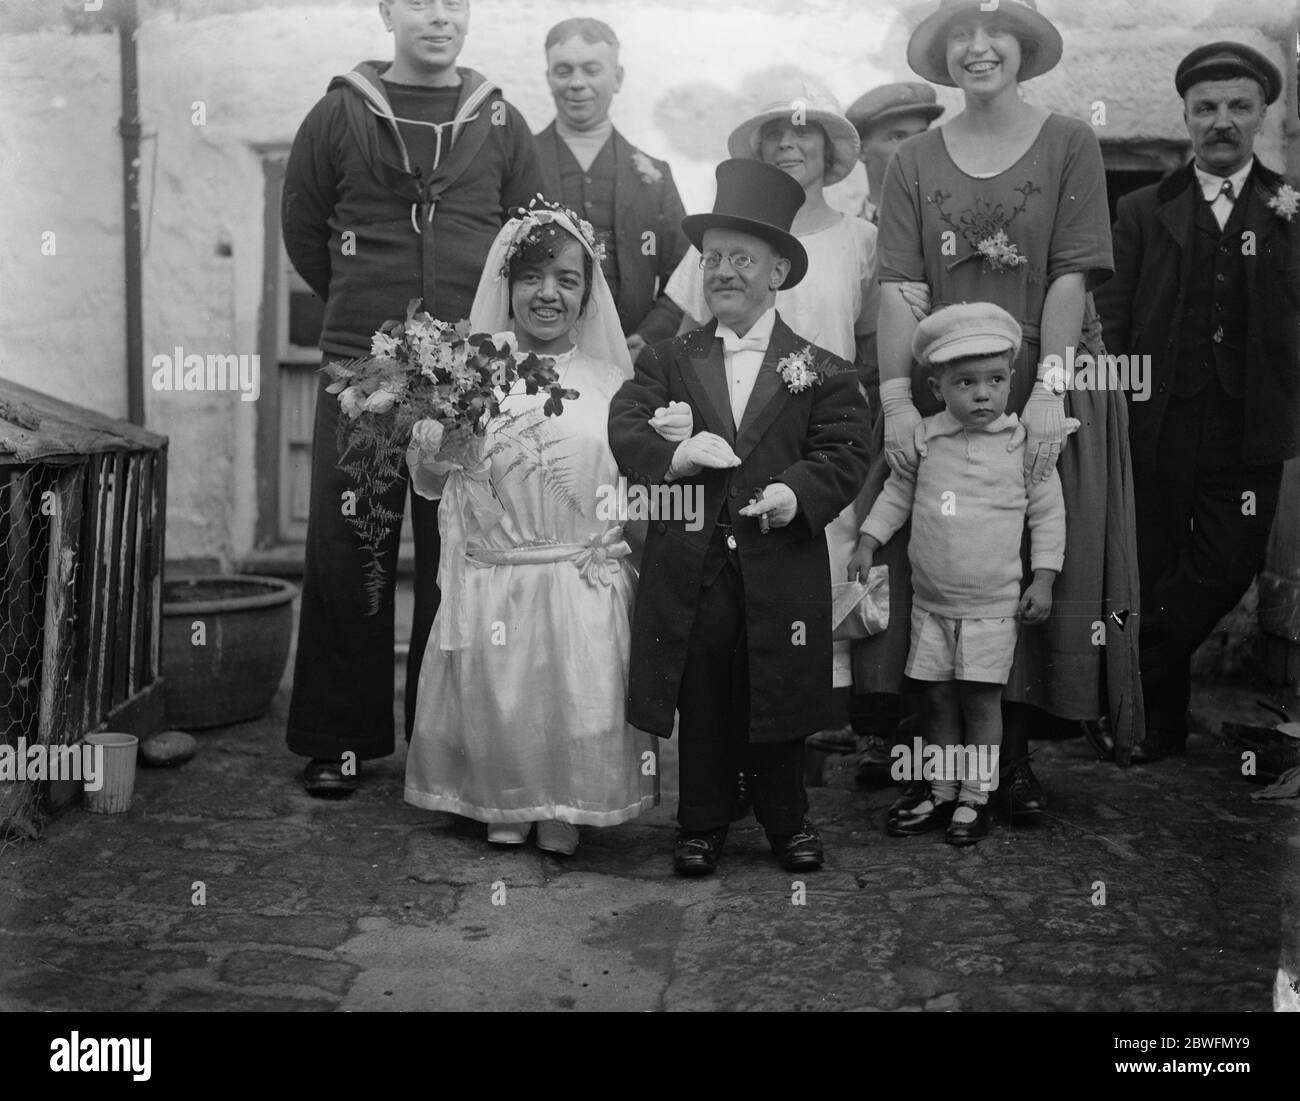 Wedding of dwarfs at Weymouth A dwarf bride and bridegroom were married at Holy Trinity church Weymouth 19 January 1925 Stock Photo